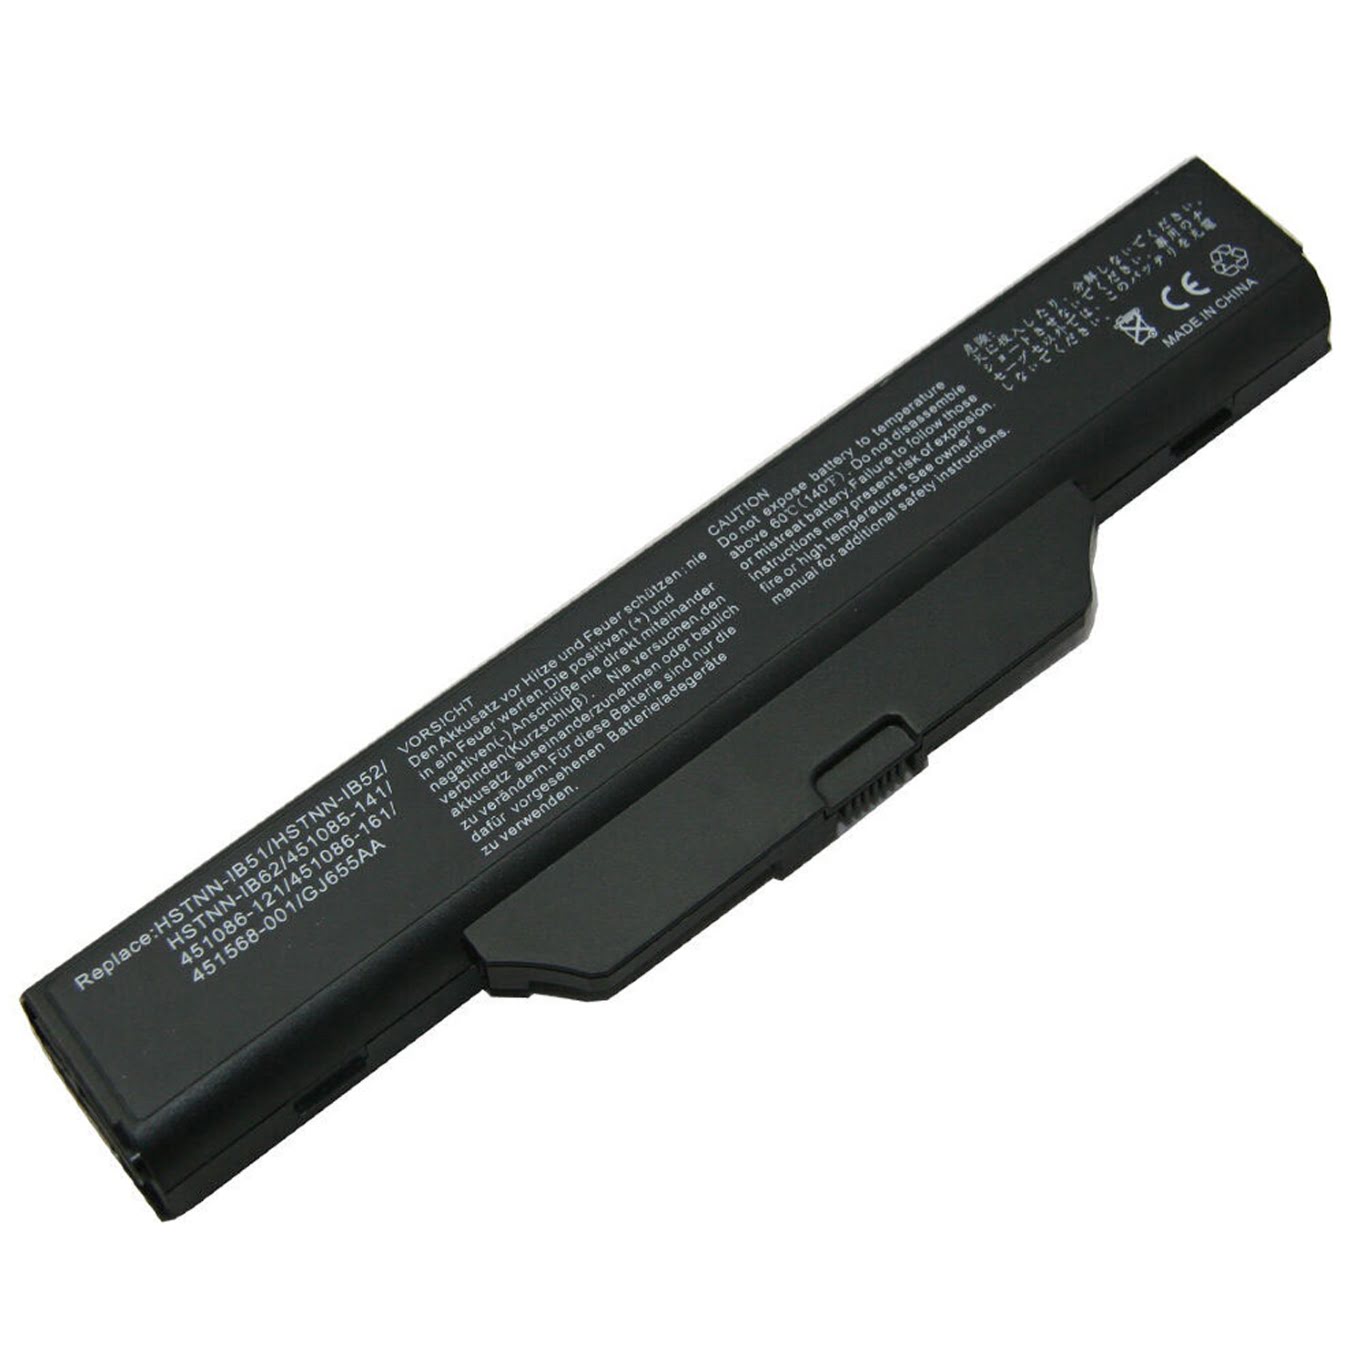 Hp 451085-121, 451085-141 Laptop Battery For 610, 550 replacement